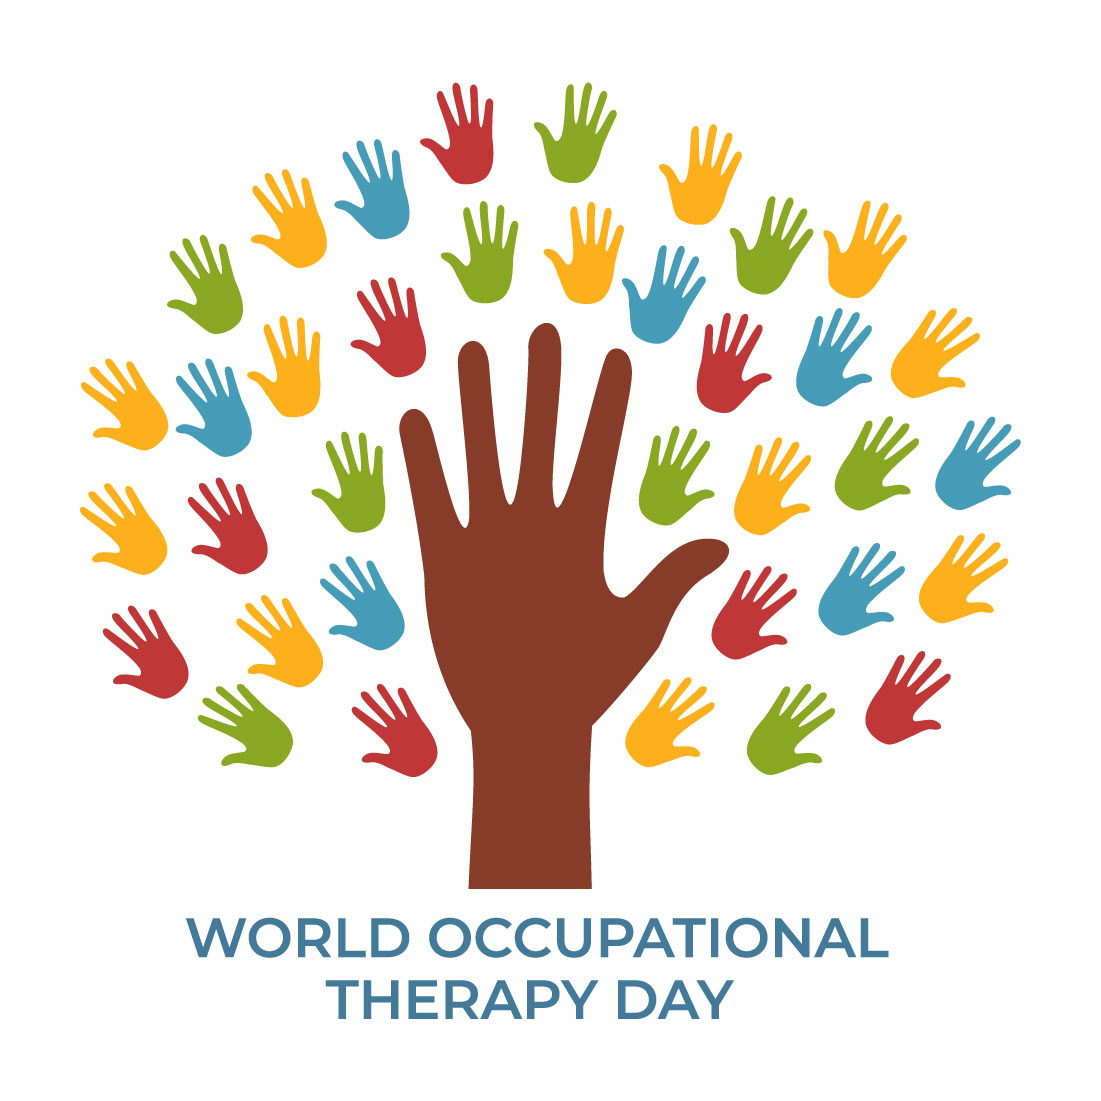 12 World Occupational Therapy Day Illustration Preview Image.